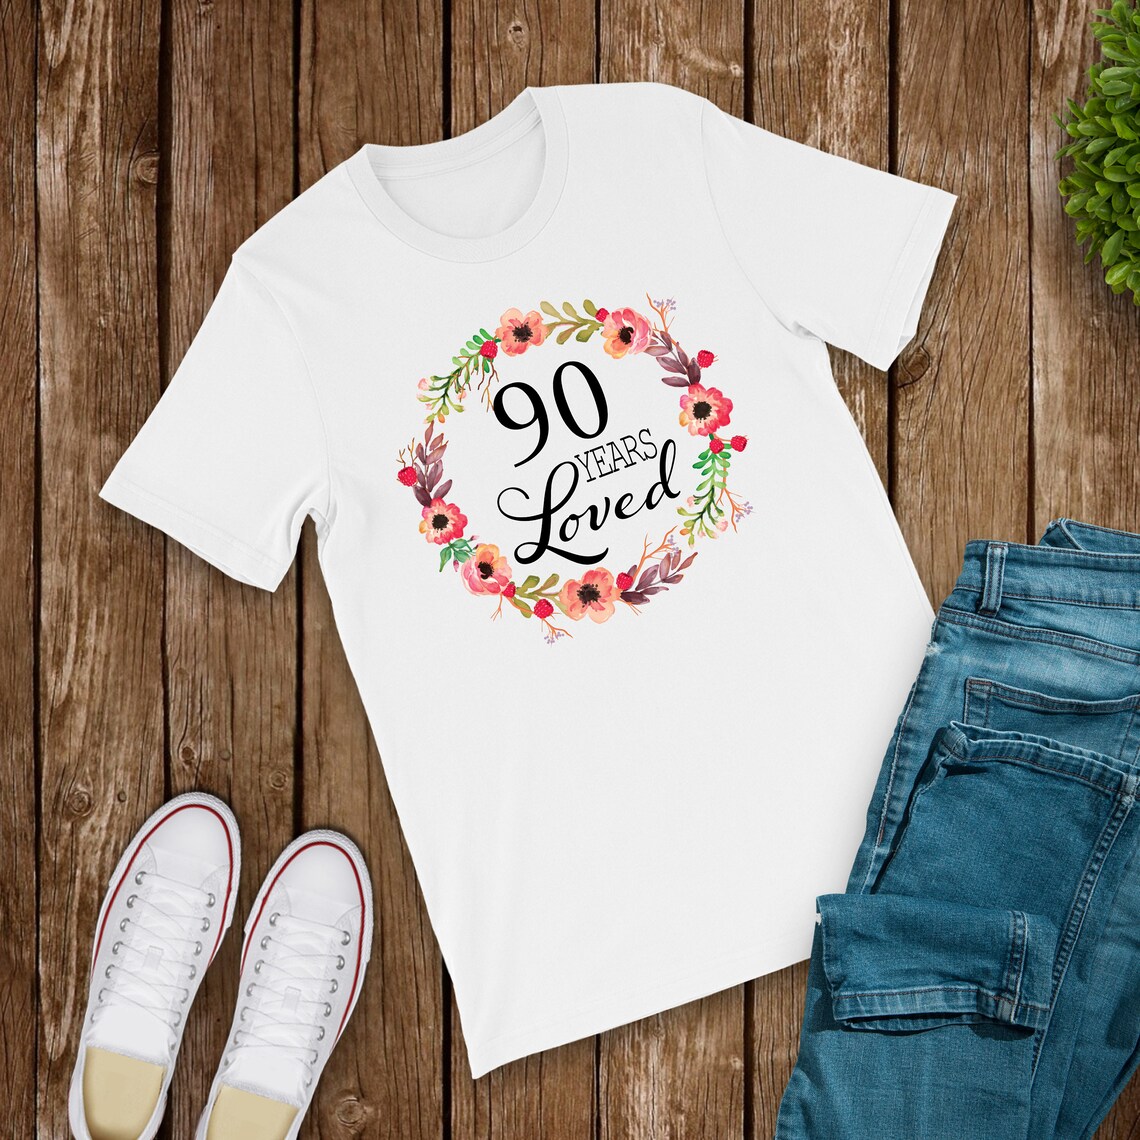 90 Years Loved T-Shirt 90th Birthday Gifts for Men Women | Etsy